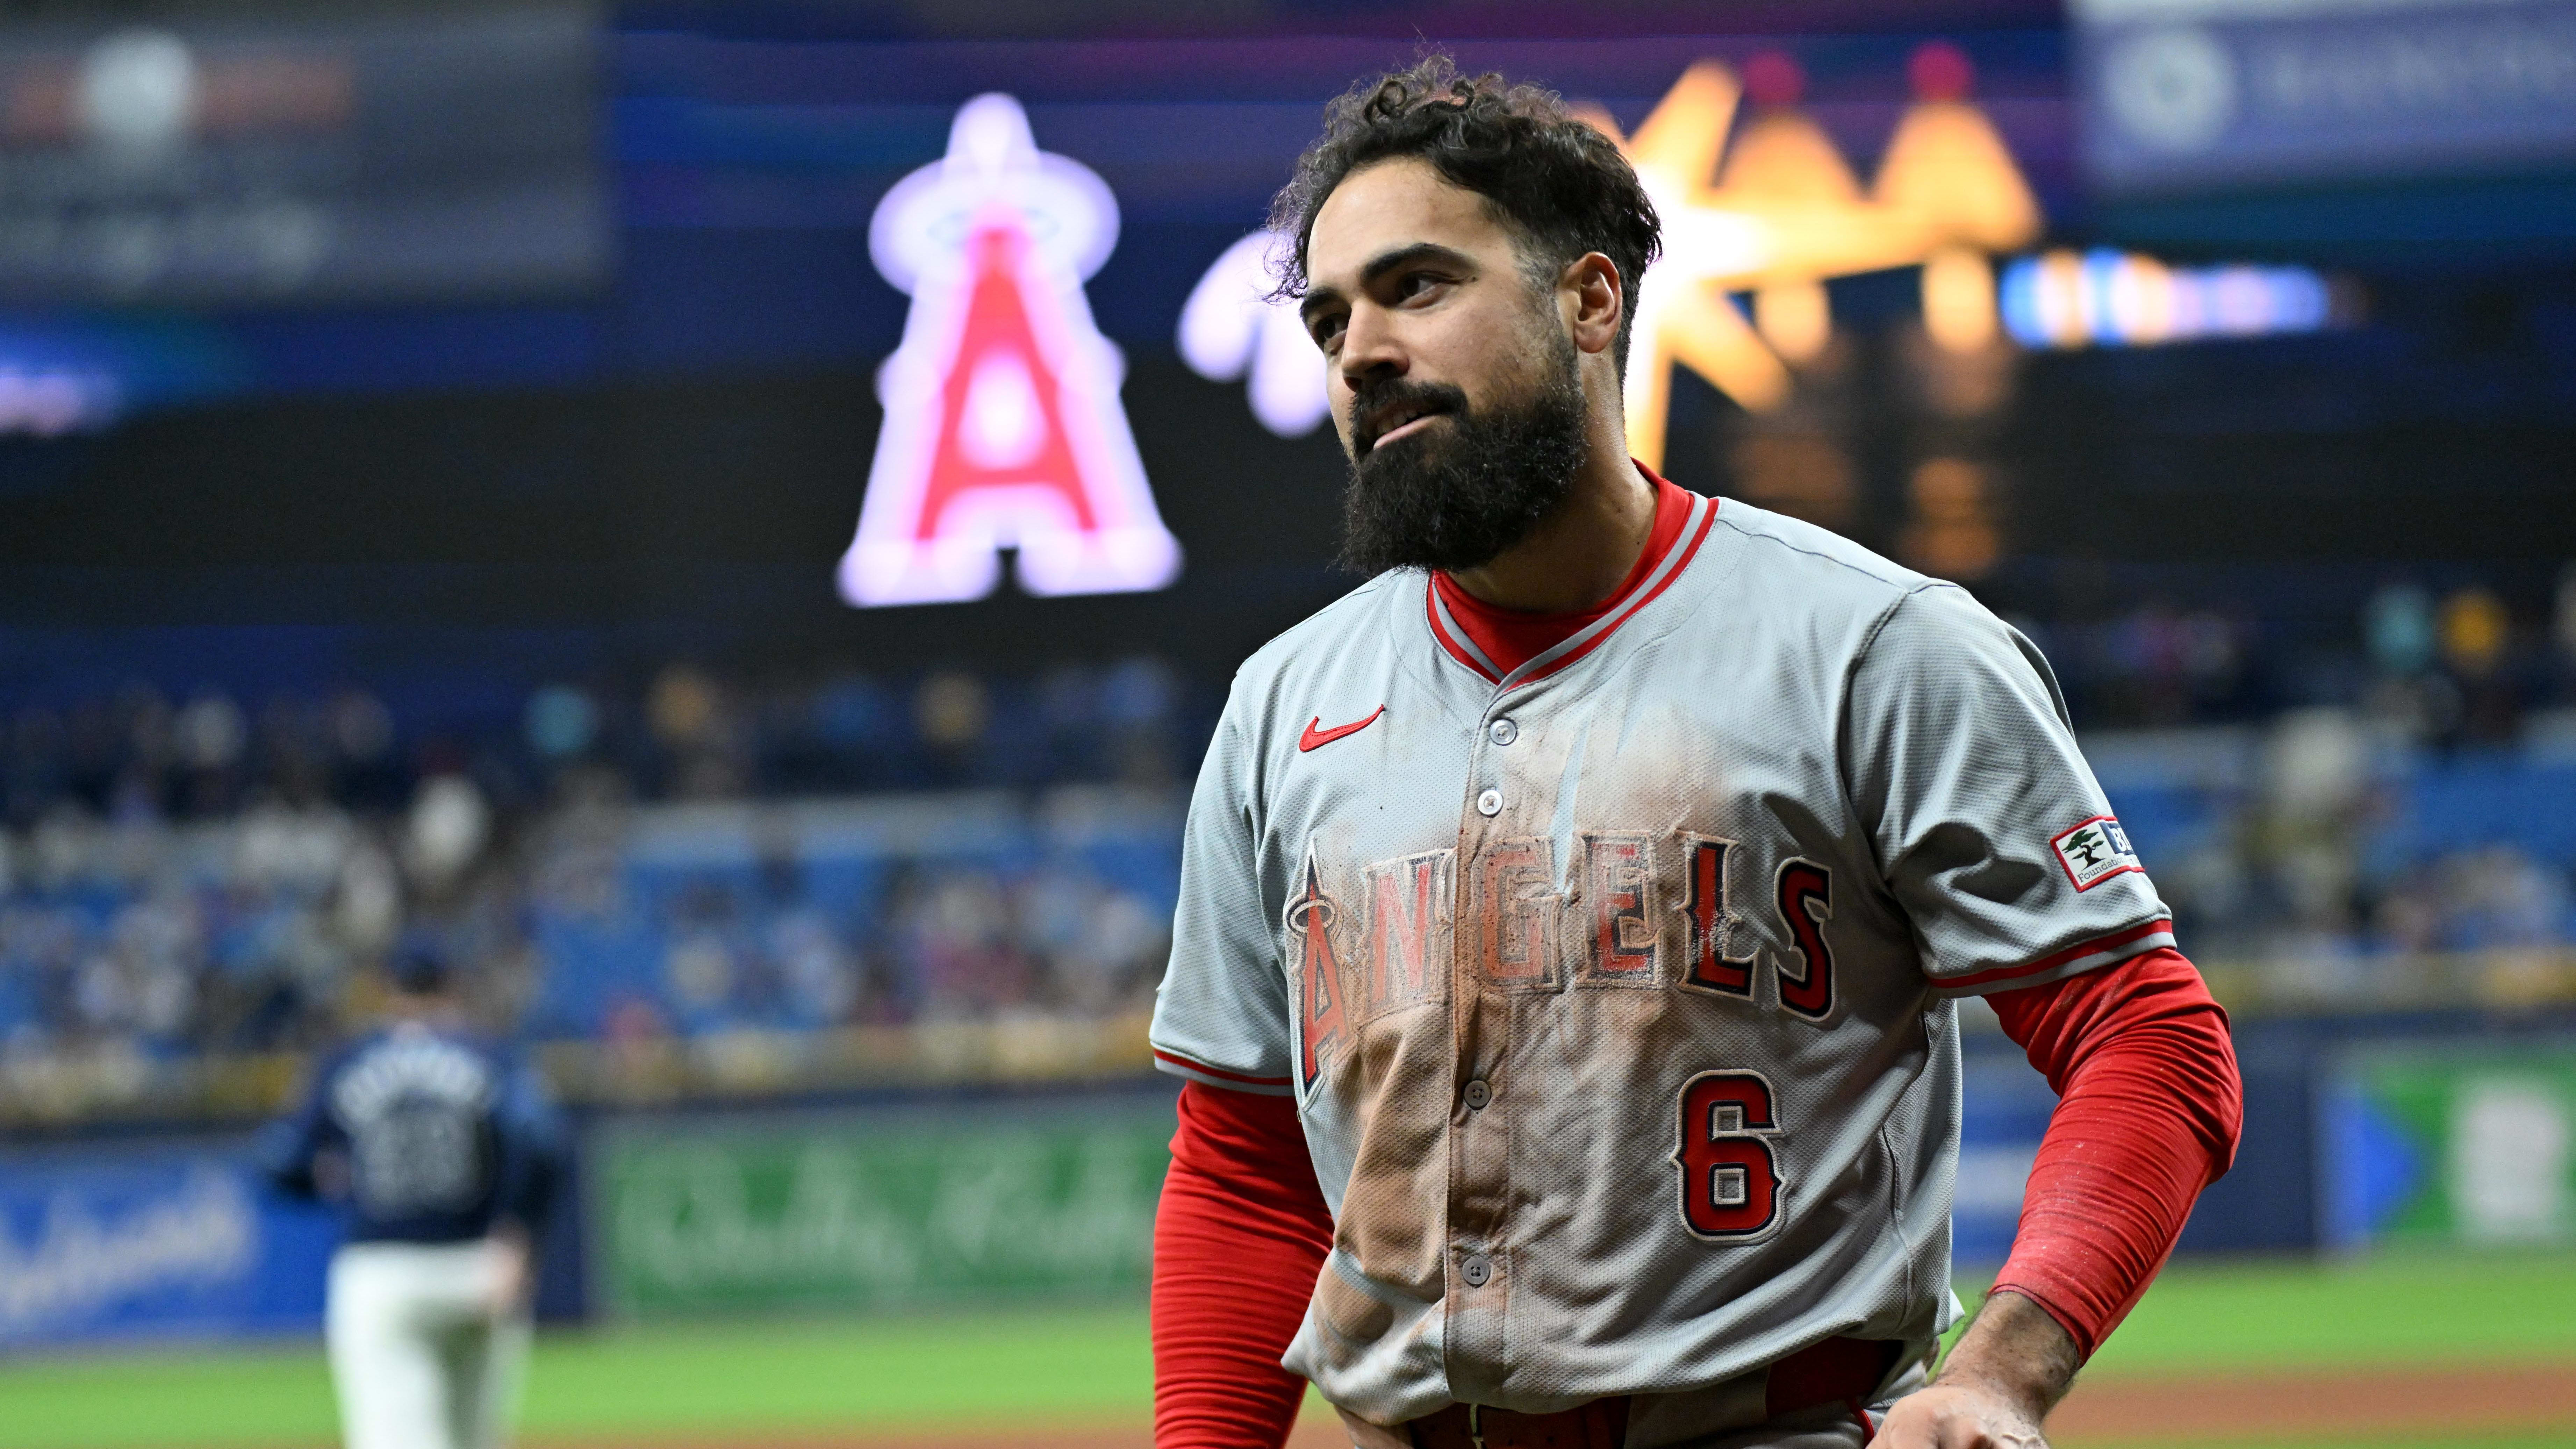 Los Angeles Angels Place Anthony Rendon on Injured List Just as He Was Heating Up